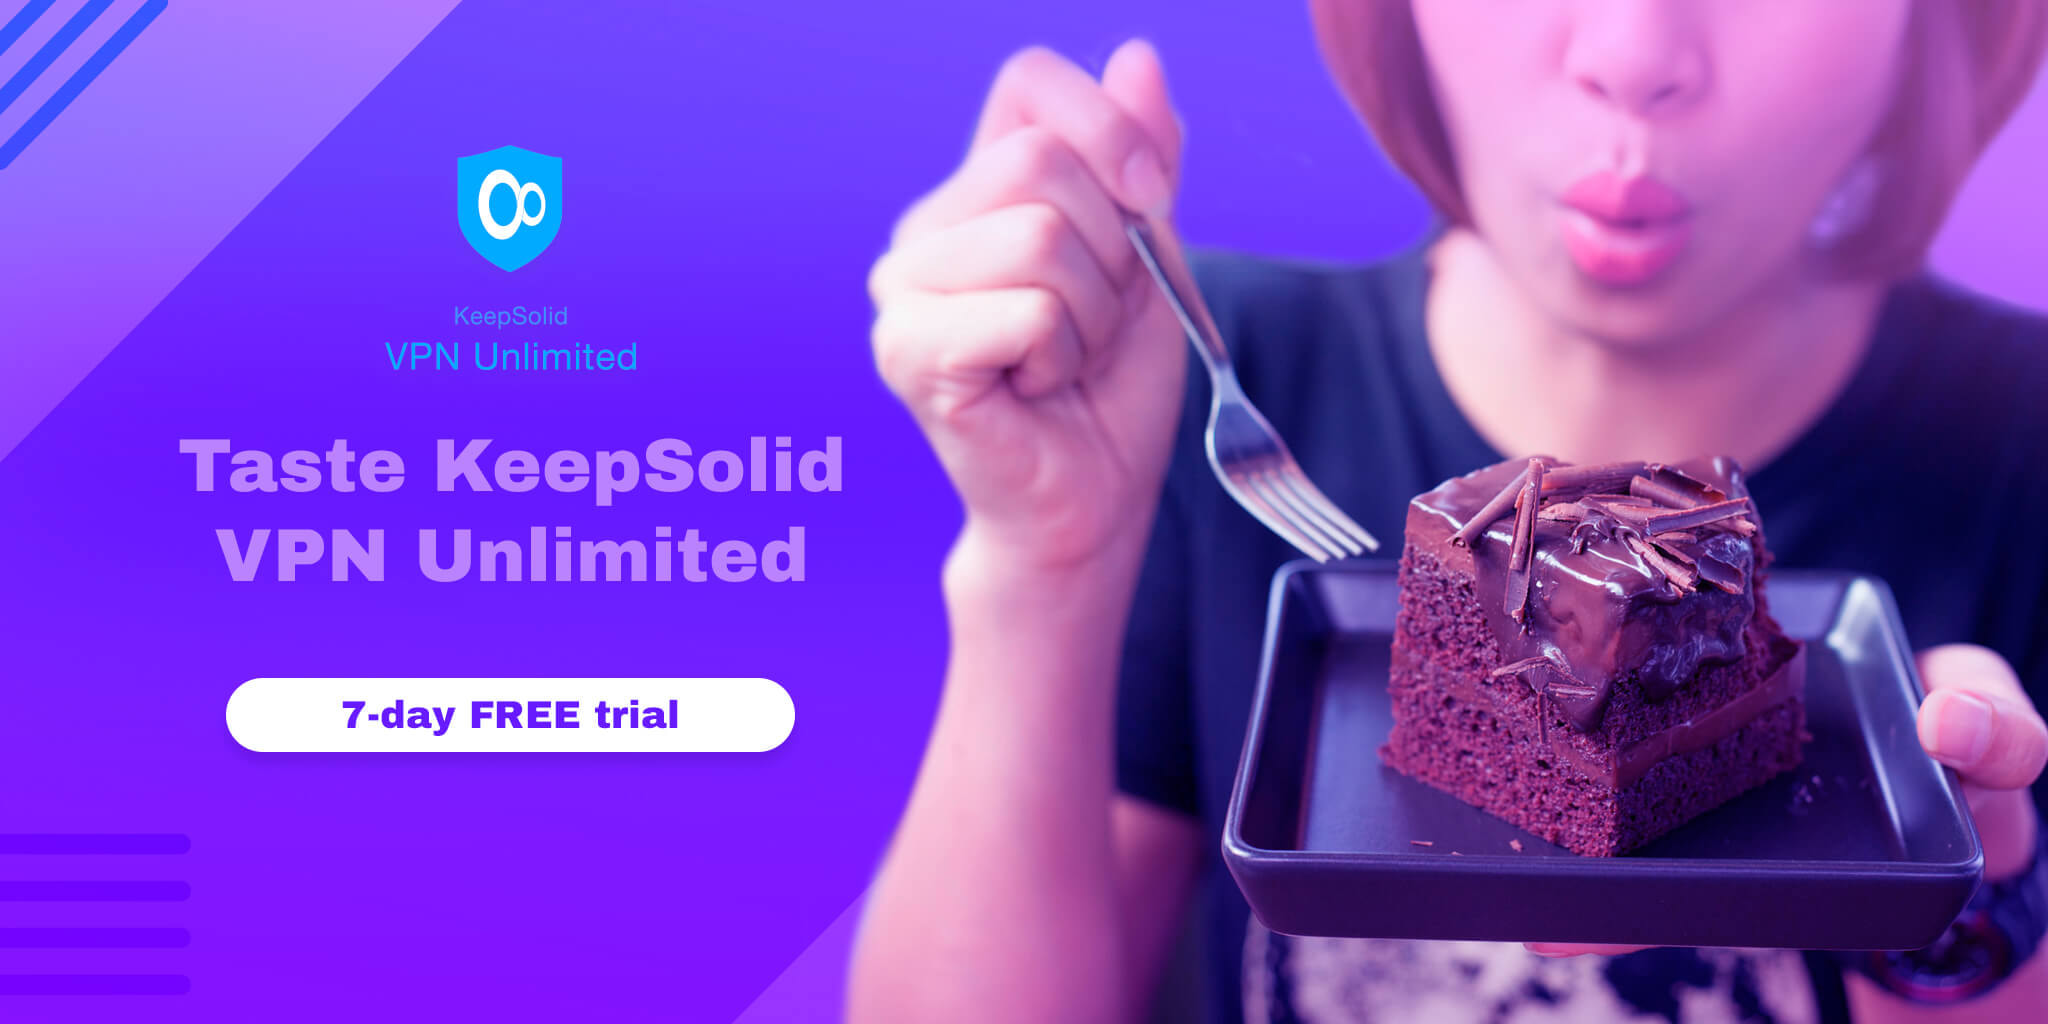 Download and try KeepSolid VPN Unlimited free for 7-days